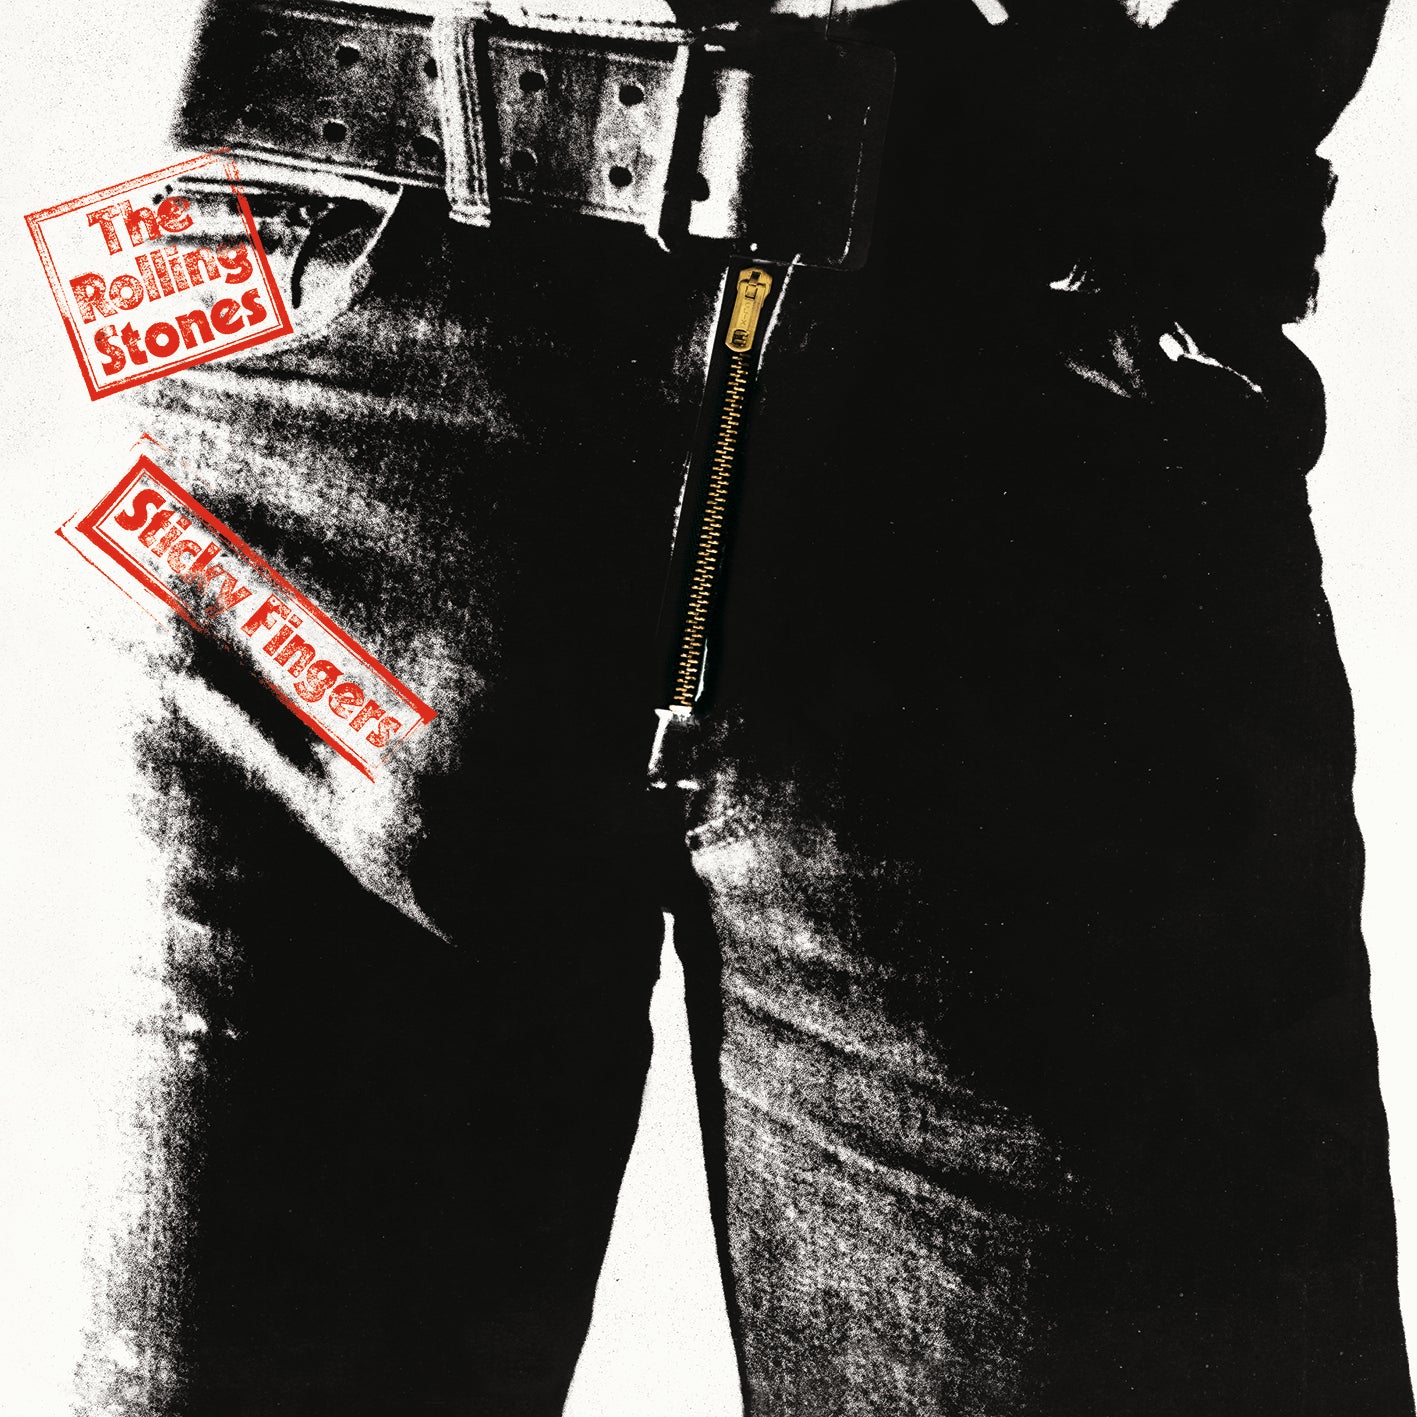 The Rolling Stones - Sticky Fingers Deluxe 2CD